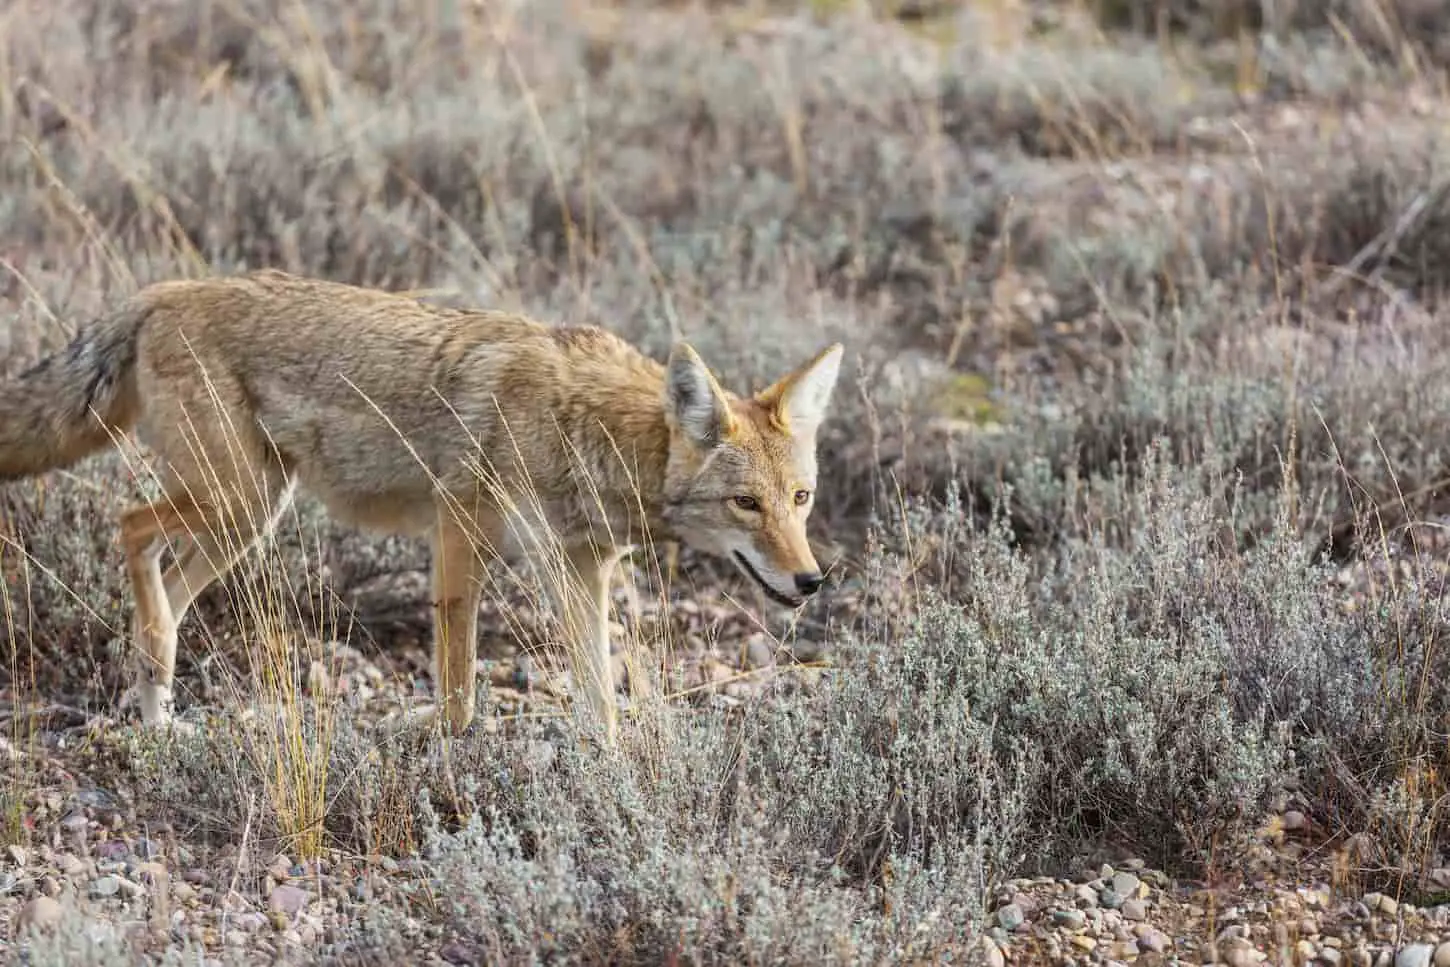 An image of a wild coyote in an autumn meadow.